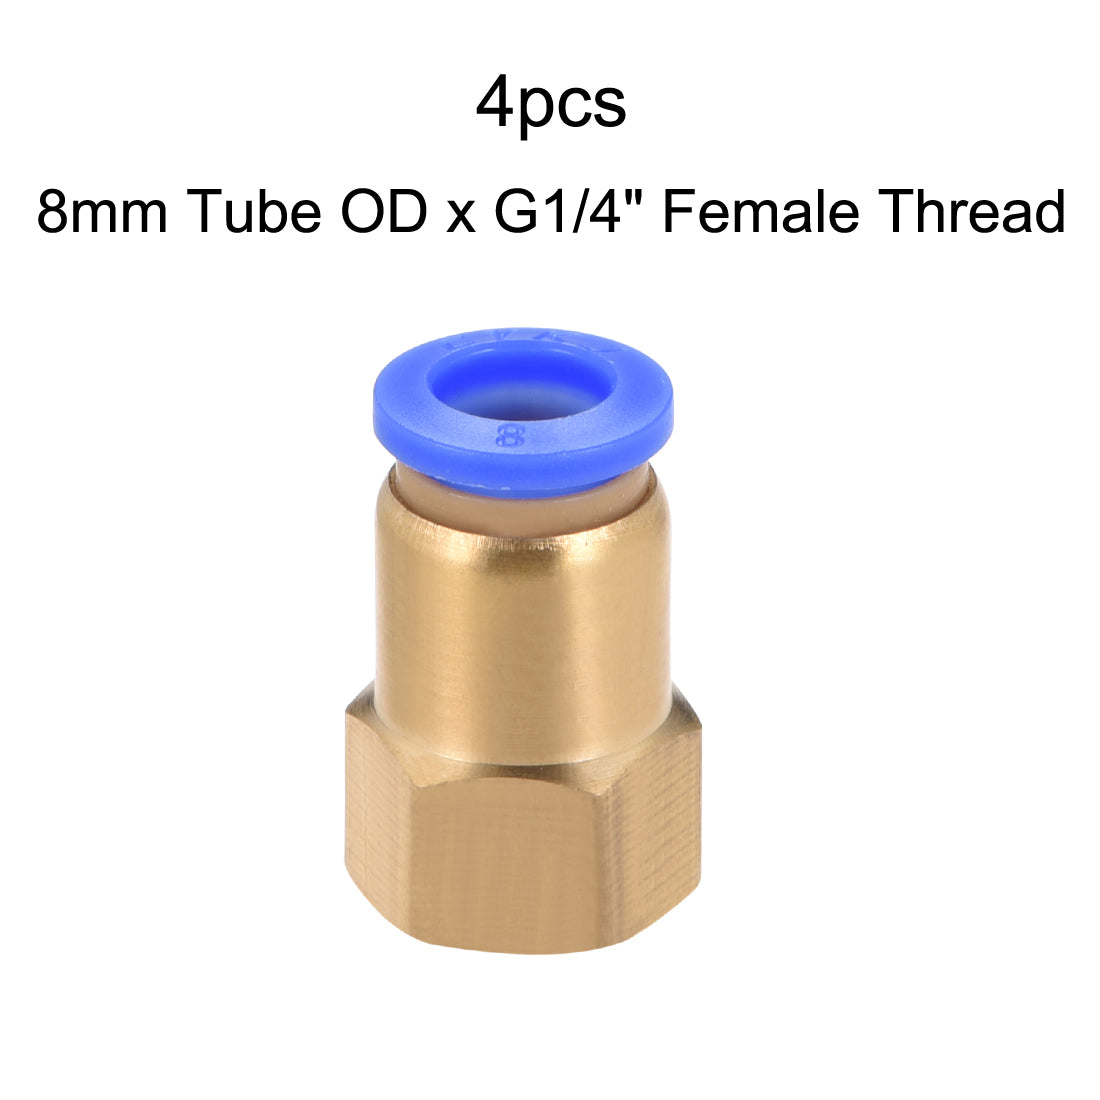 uxcell Uxcell Push to Connect Tube Fitting Adapter 8mm OD x G1/4" Female 4pcs